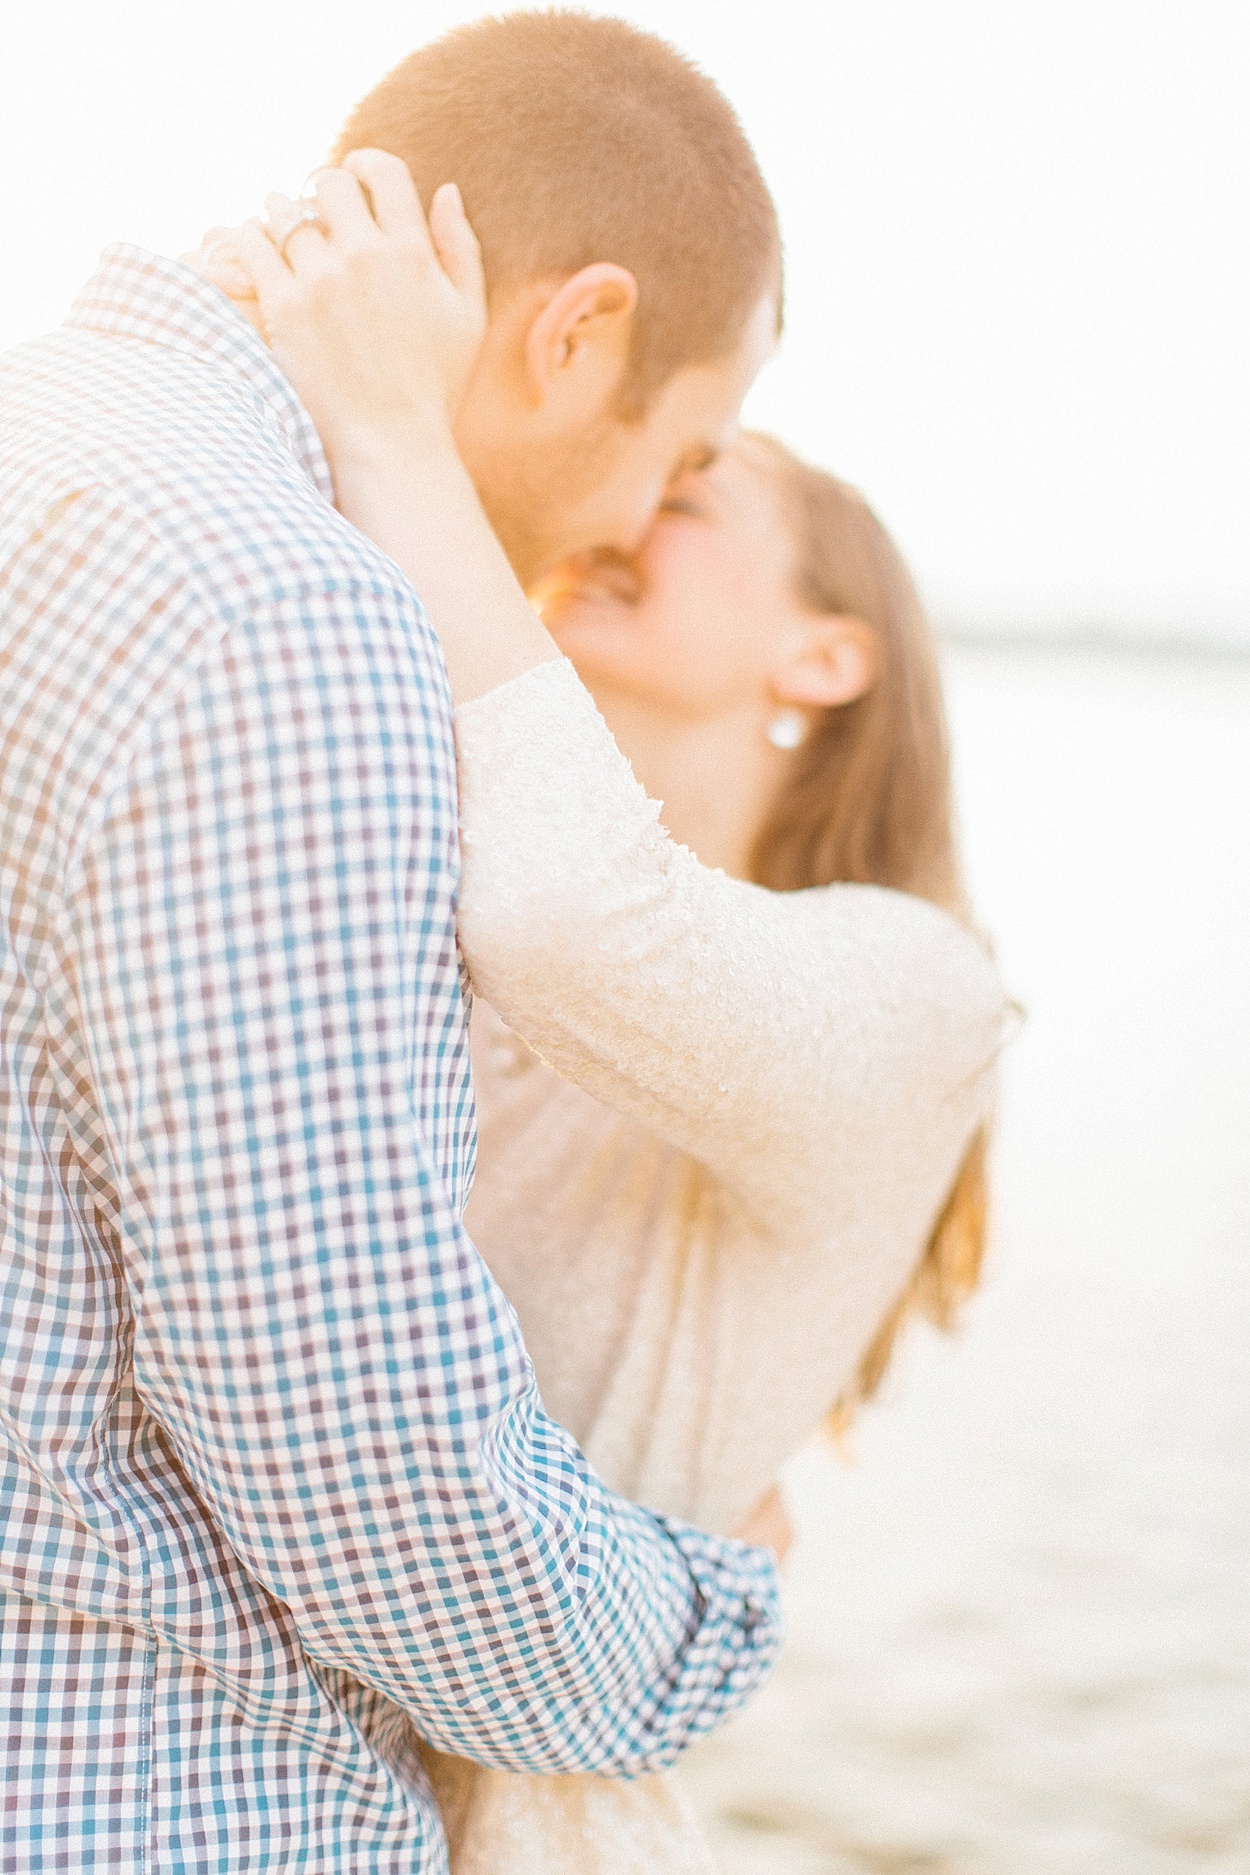 View More: http://abbygracephotography.pass.us/nick-nicole-engagement